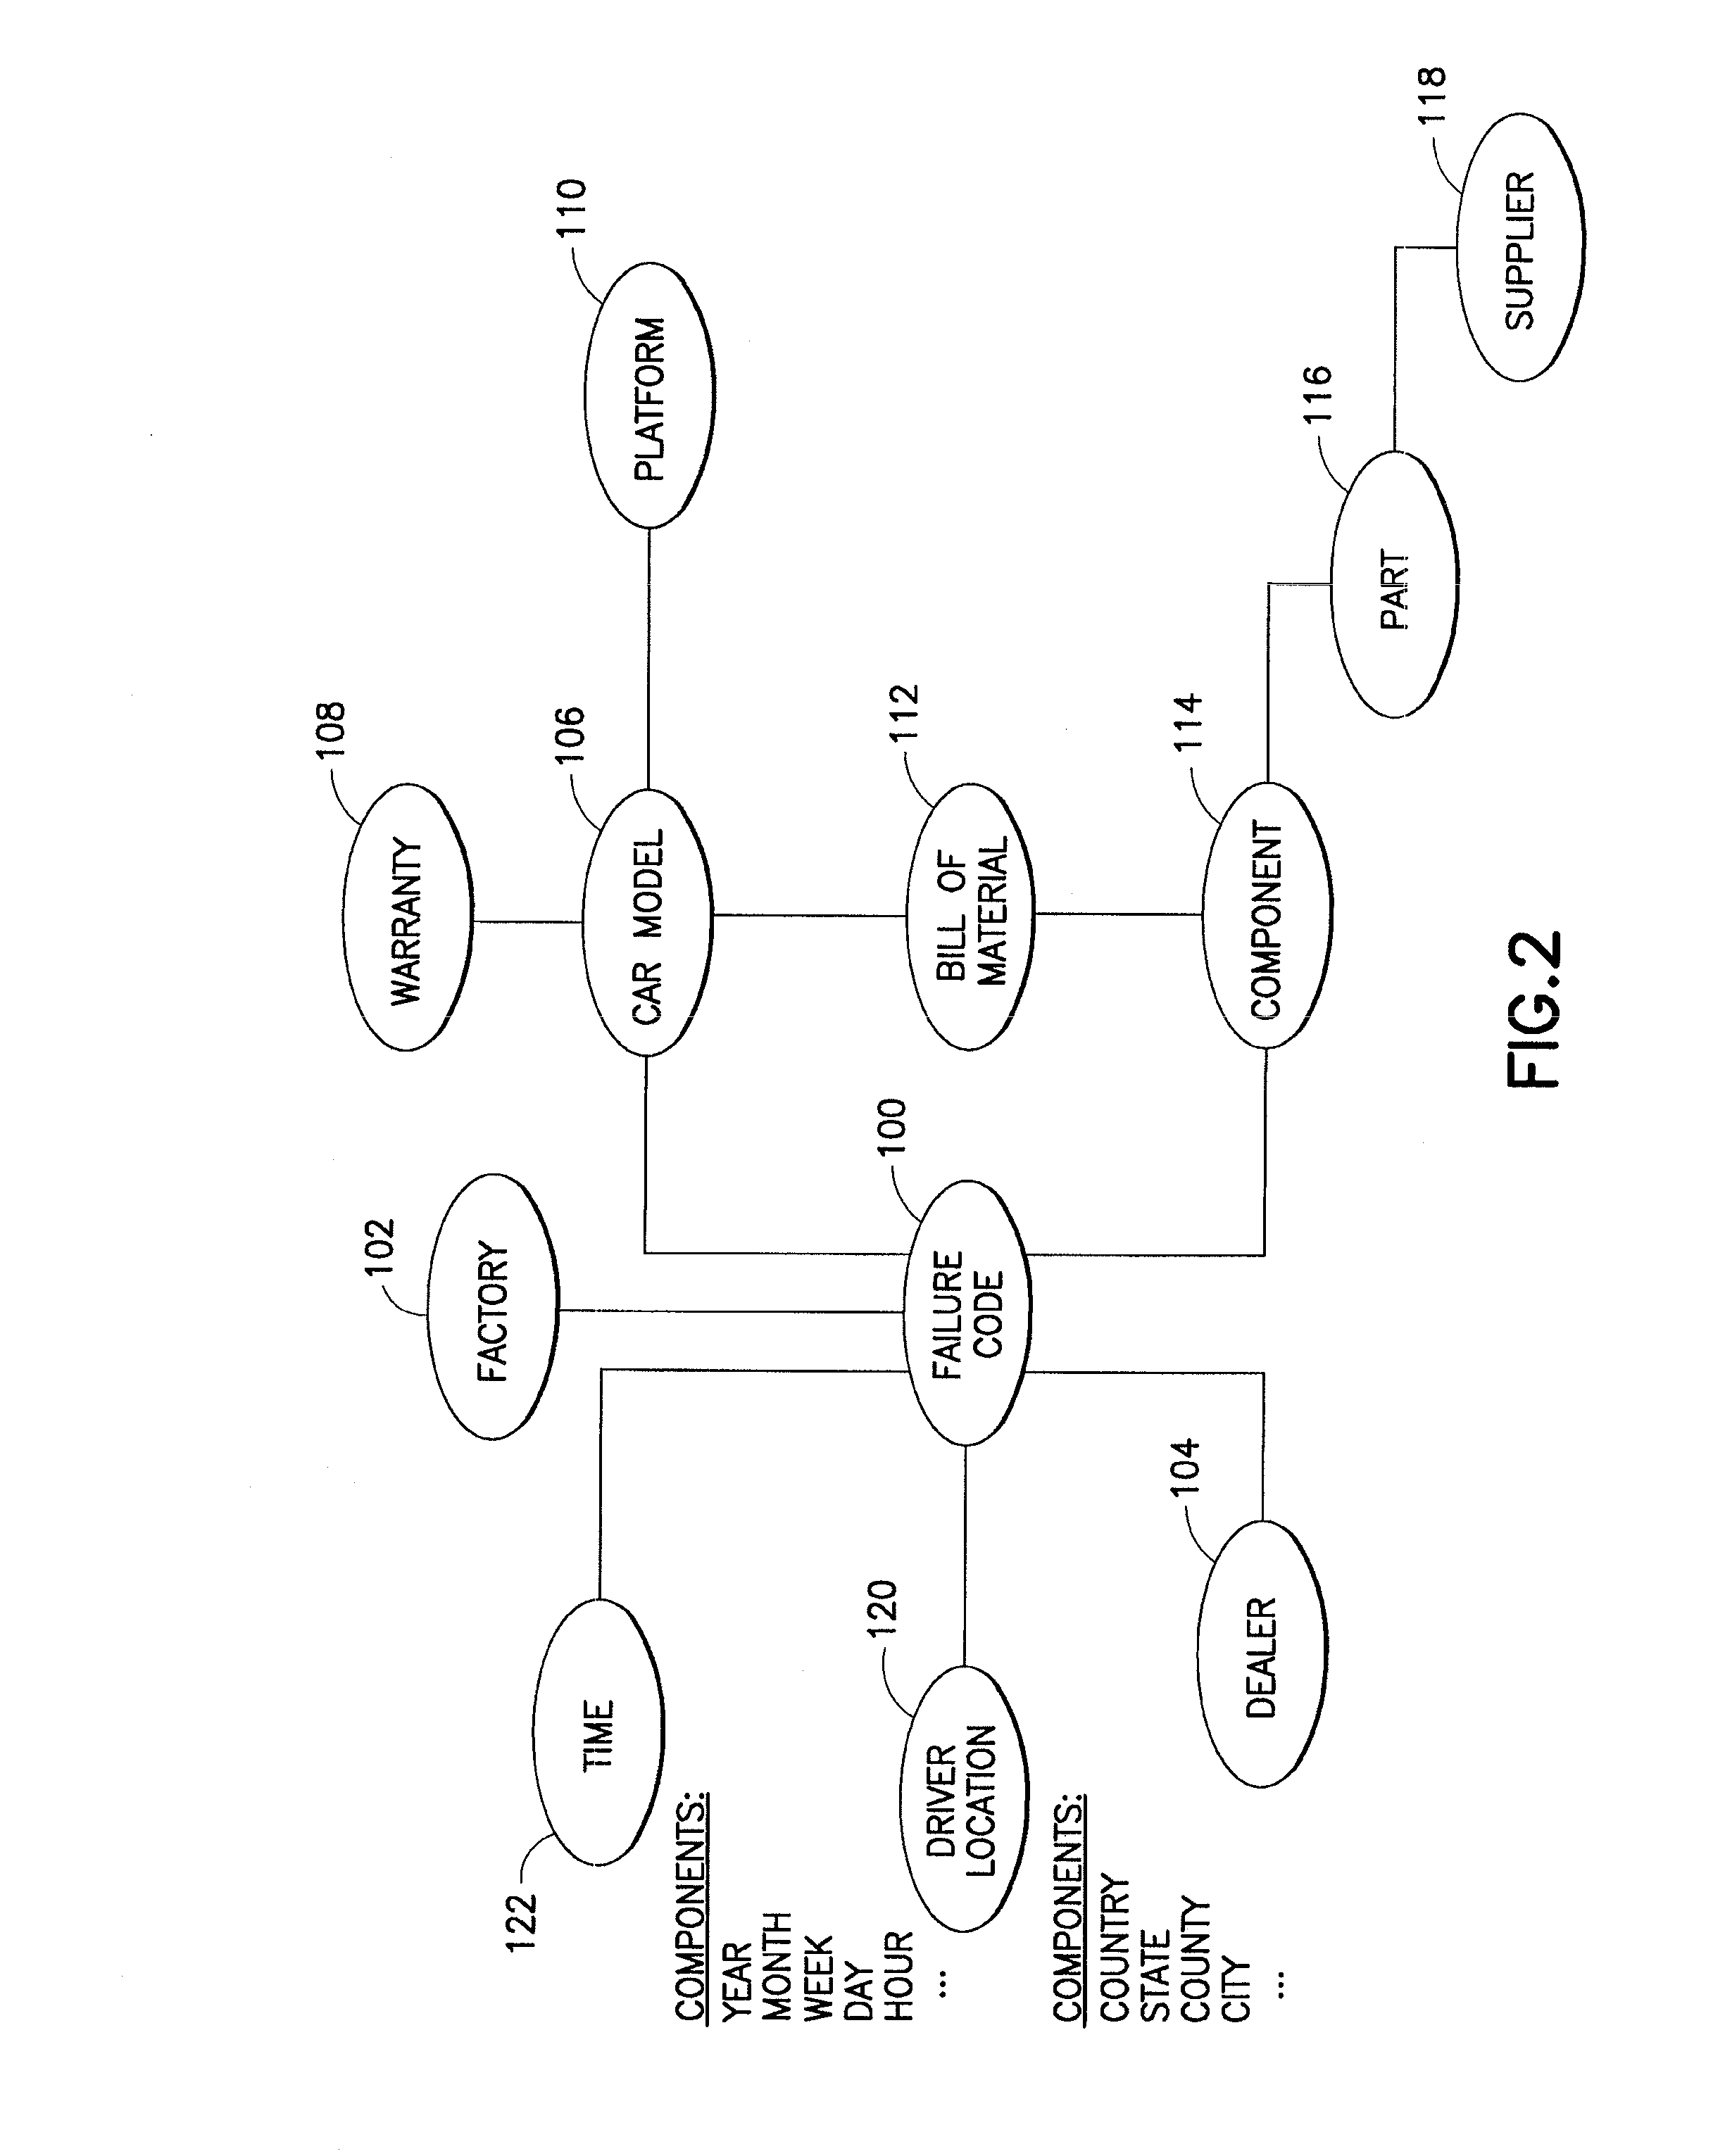 System and Method for Planning and Generating Queries for Multi-Dimensional Analysis using Domain Models and Data Federation